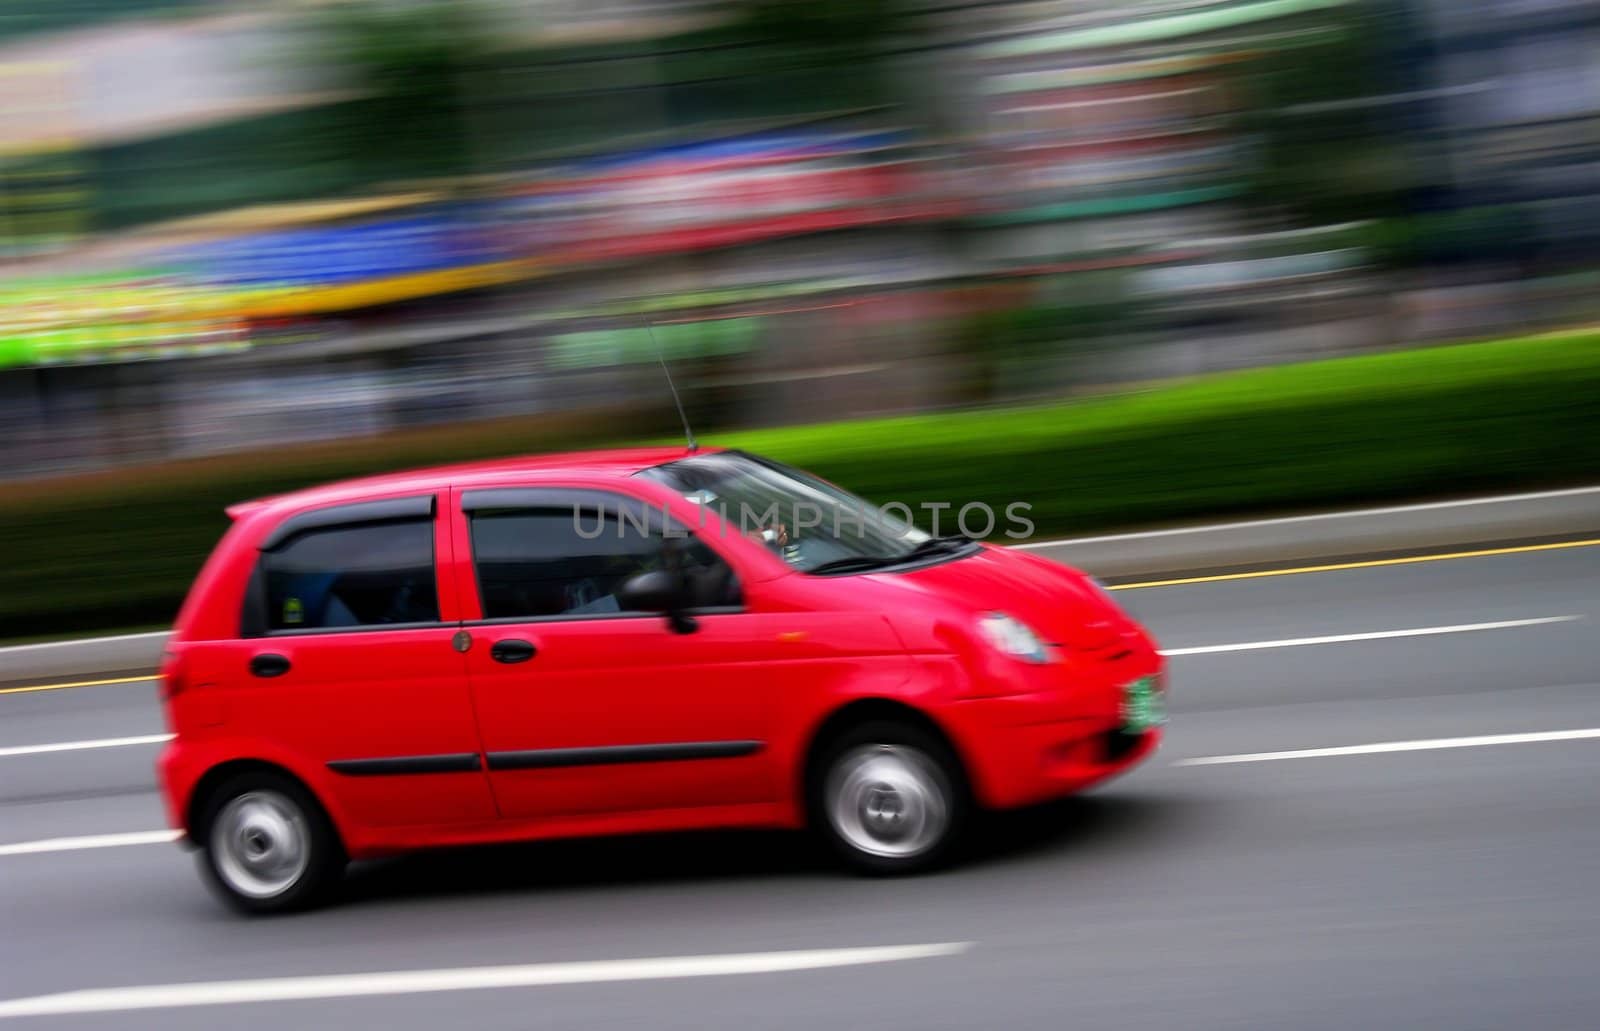  Red Car with Motion Blur by clickbeetle